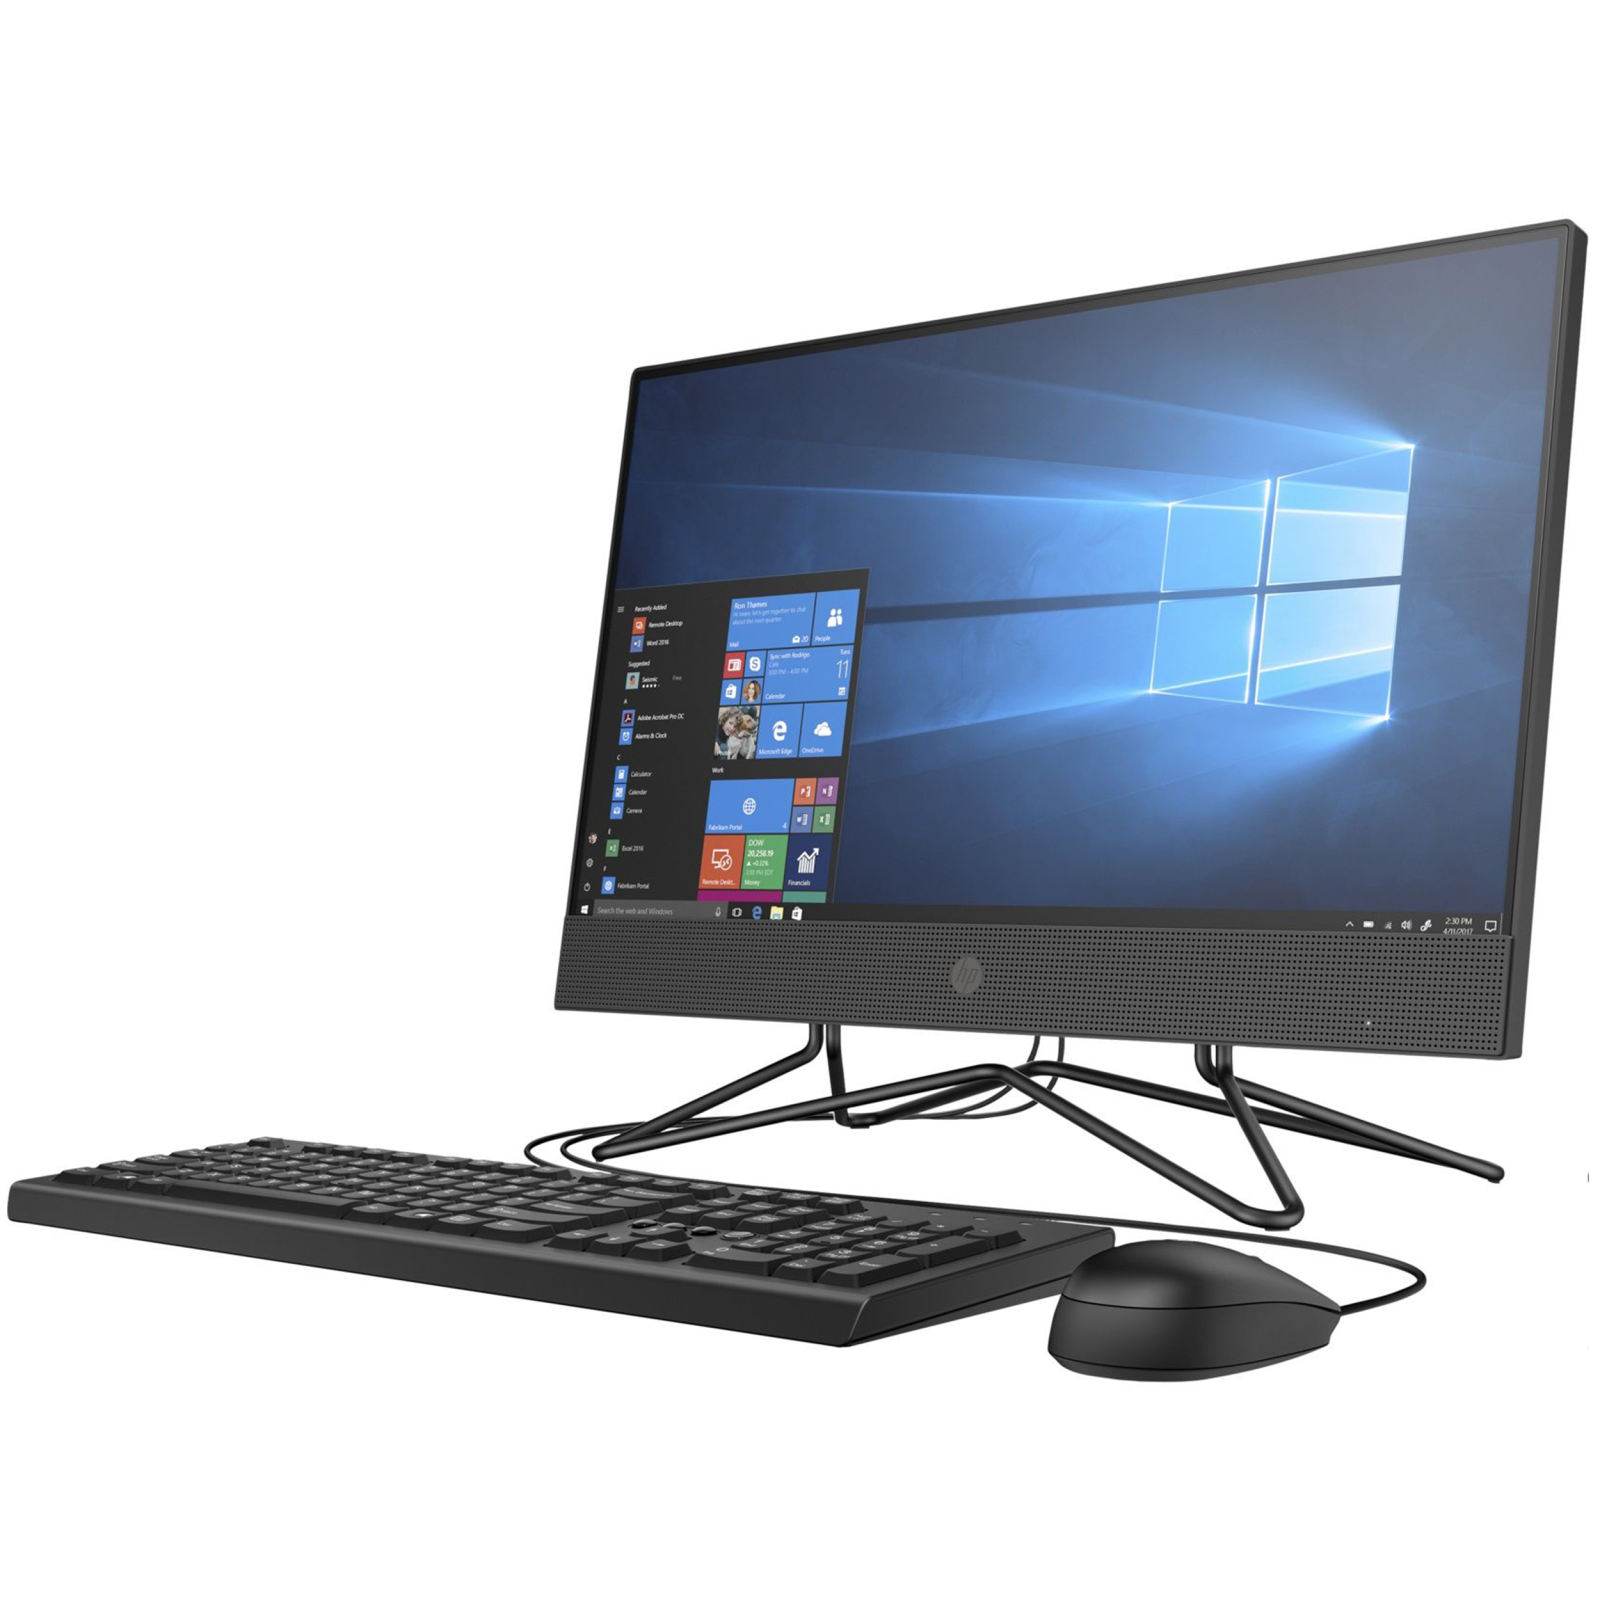 HP 200 G4-B5B 21.5 inch All-In-One PC